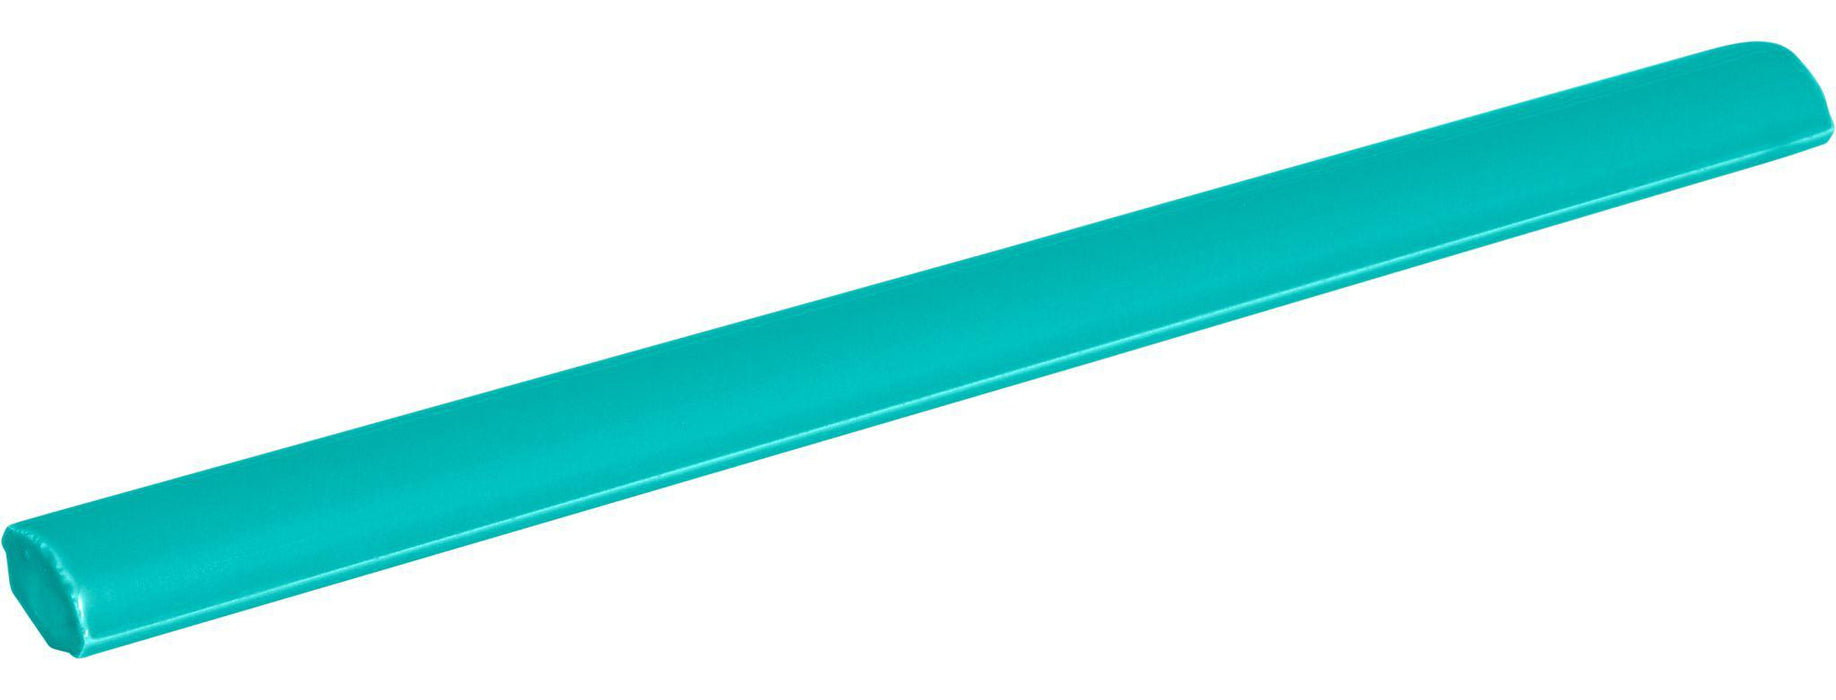 Gioia Turquoise Glossy 3/8x8 Porcelain Pencil Bullnose